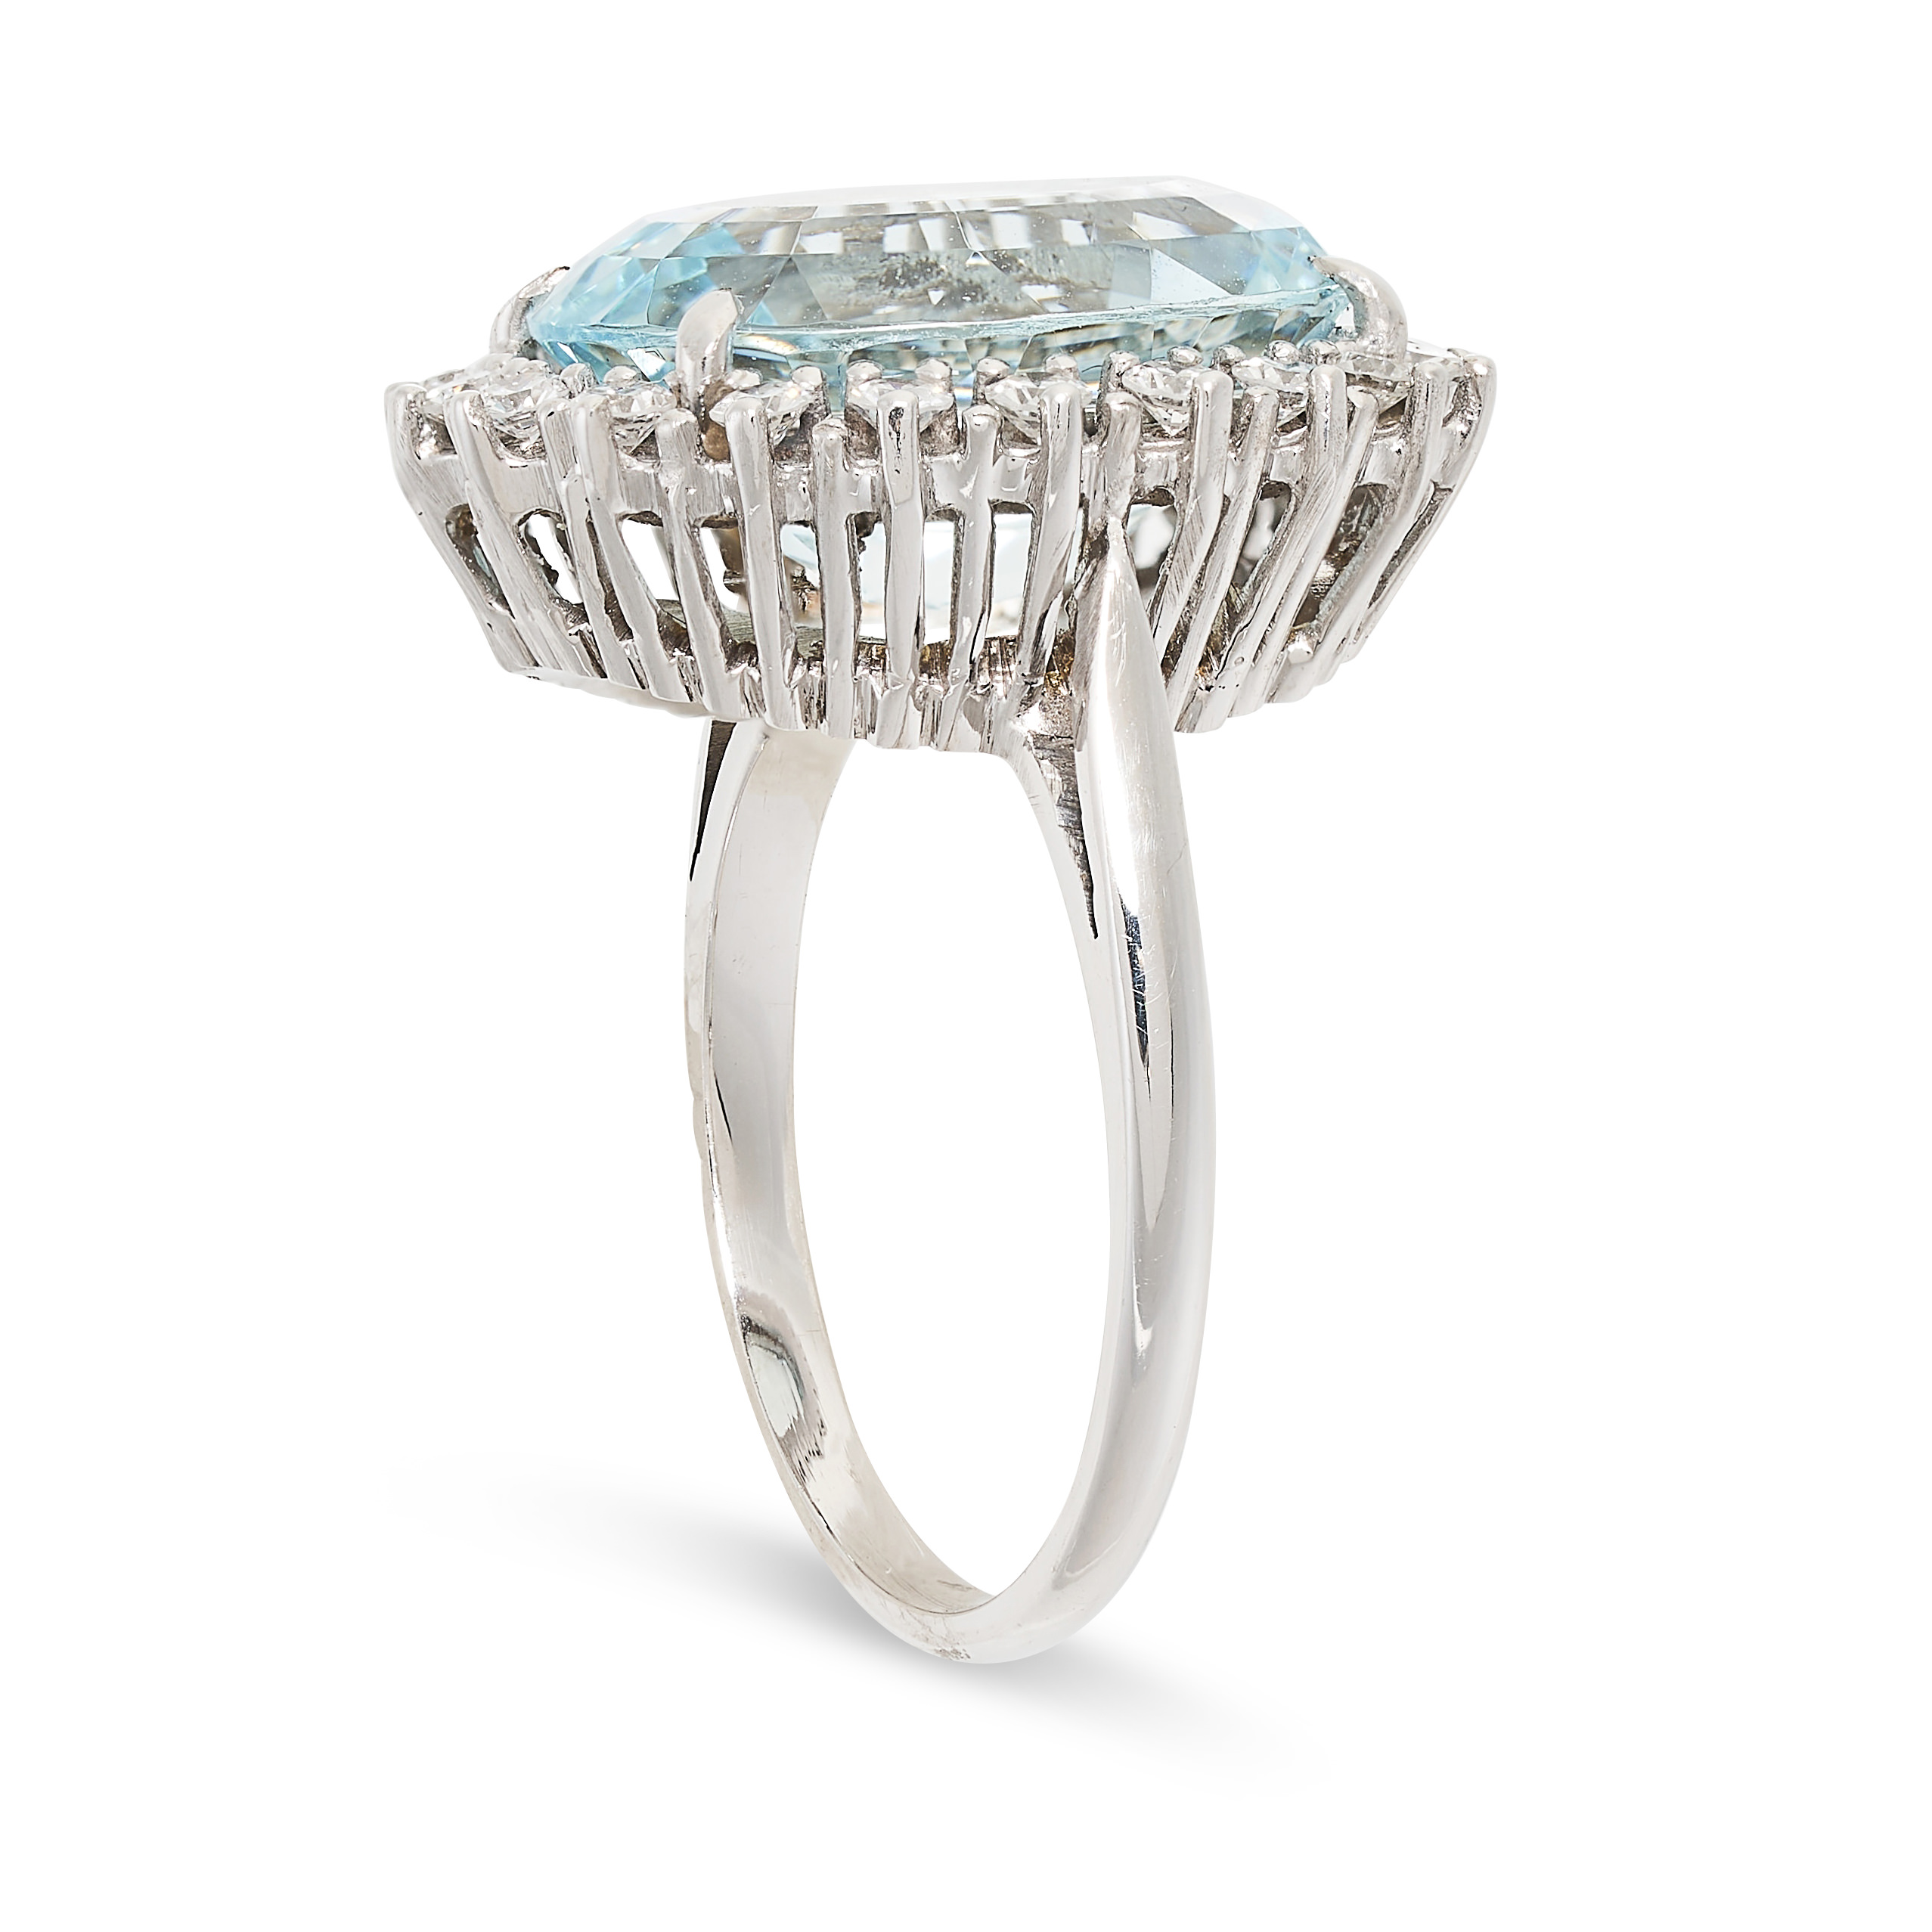 AN AQUAMARINE AND DIAMOND DRESS RING set with an oval cut aquamarine of 6.80 carats, within a border - Image 2 of 2